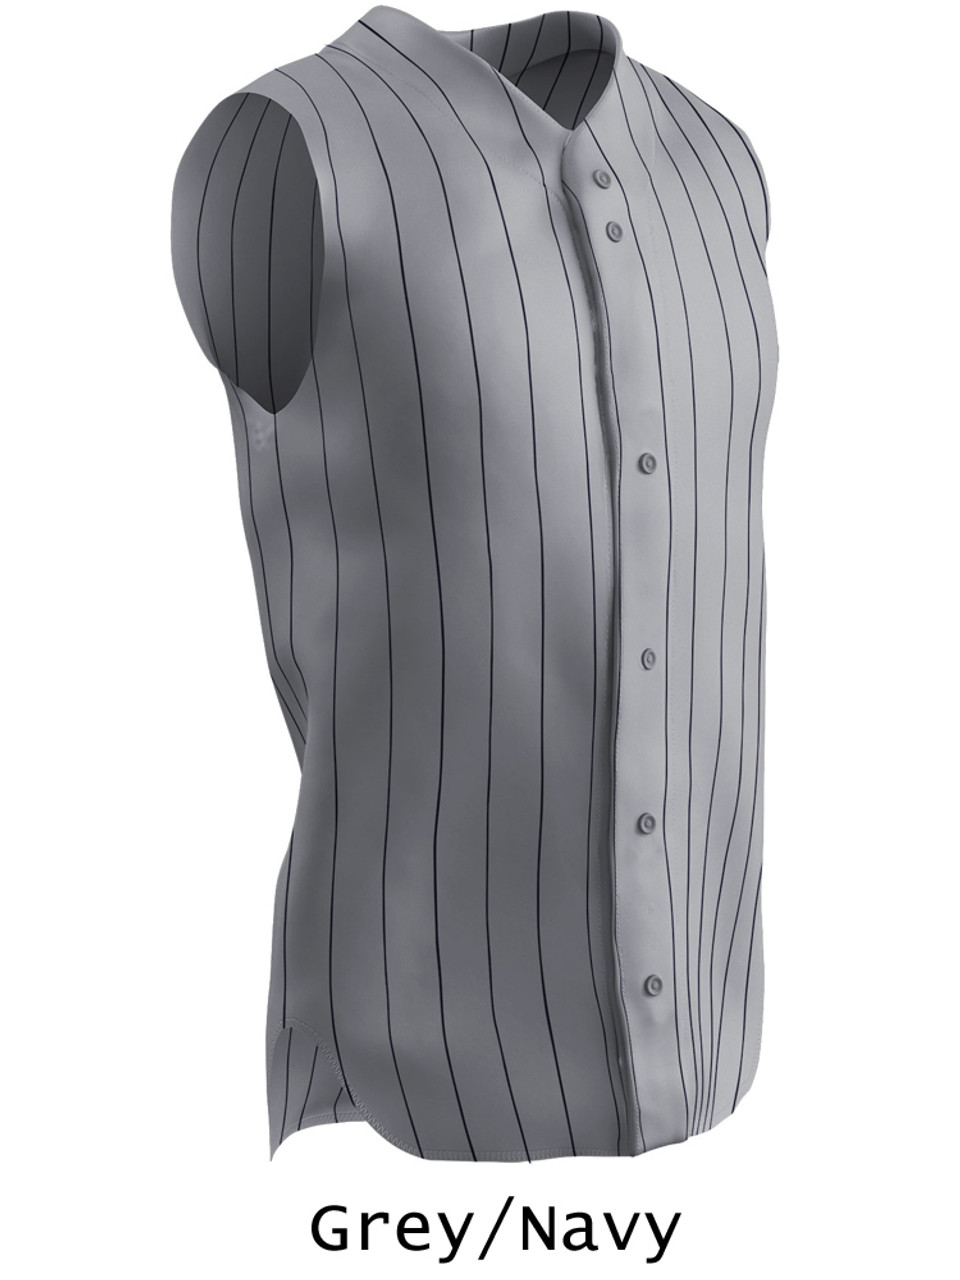 Elite Pinstripe BB Jersey SS Full-Button - Adult & Youth